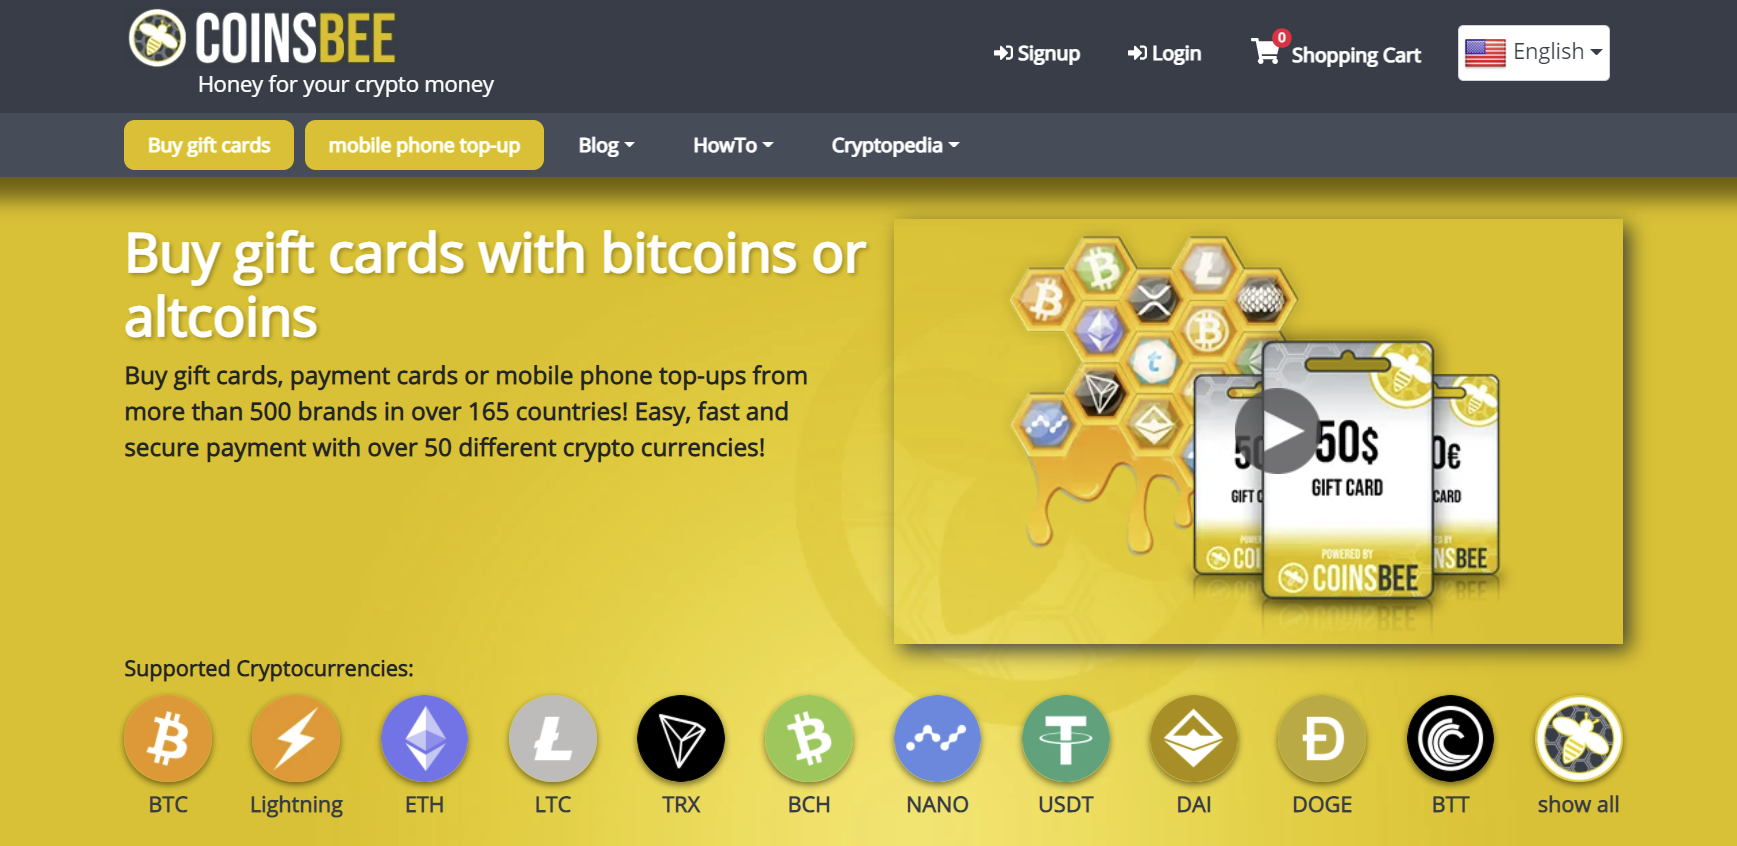 How to Buy Gift Cards With Cryptocurrencies on Coinsbee ...